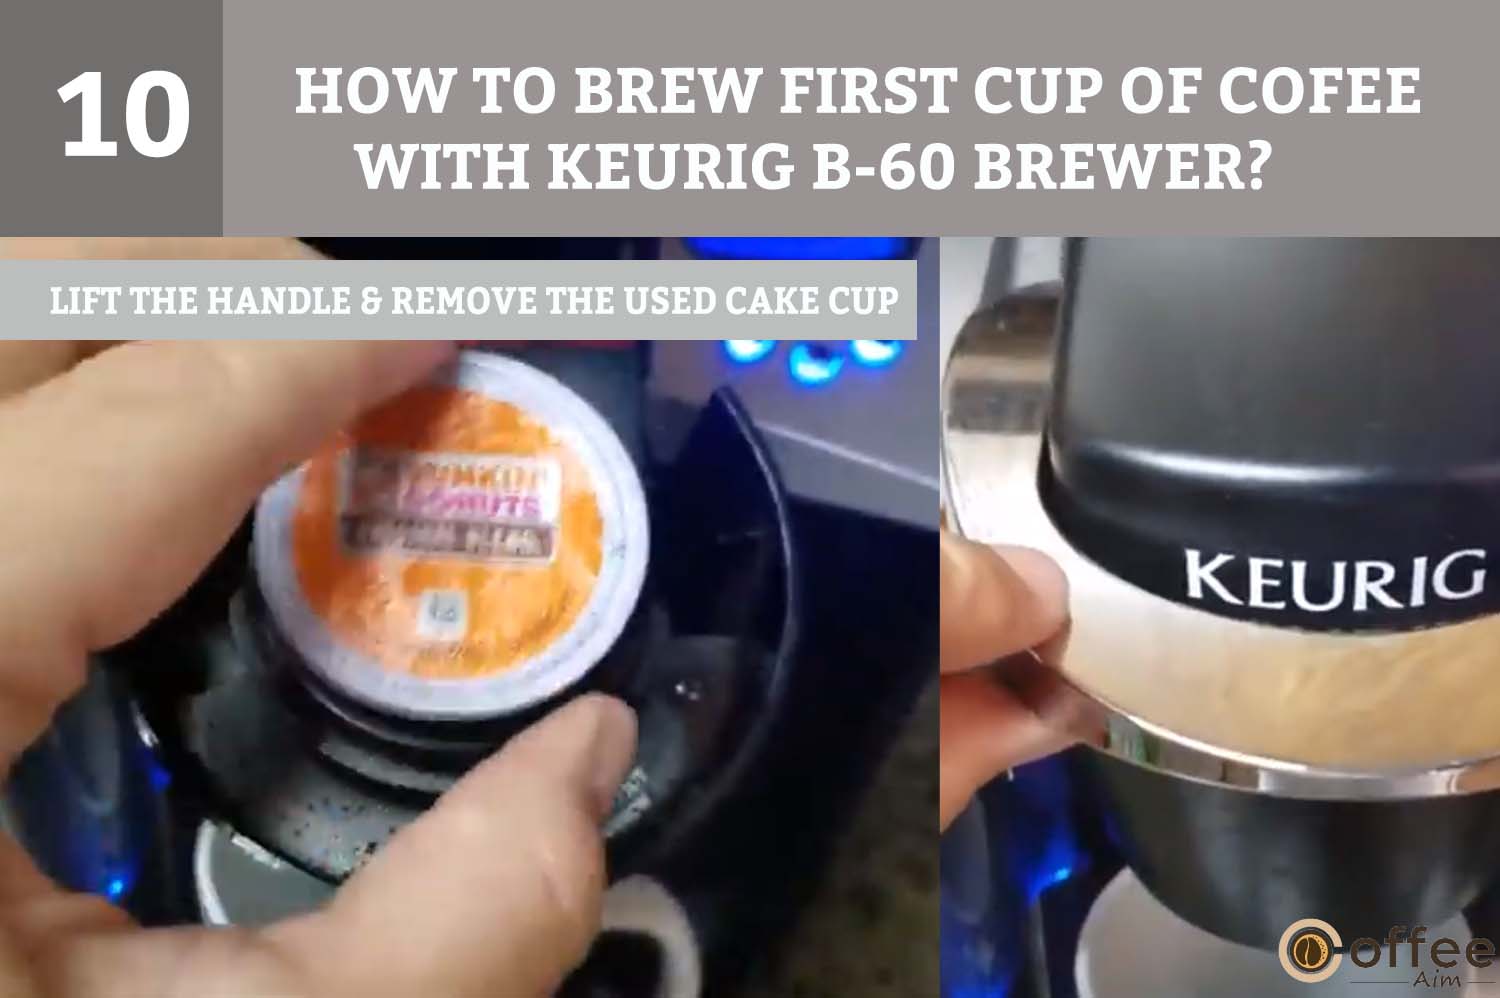 Lift the handle, take out the used K-cup, and dispose of it properly. Be careful, as the K-cup may still be hot.